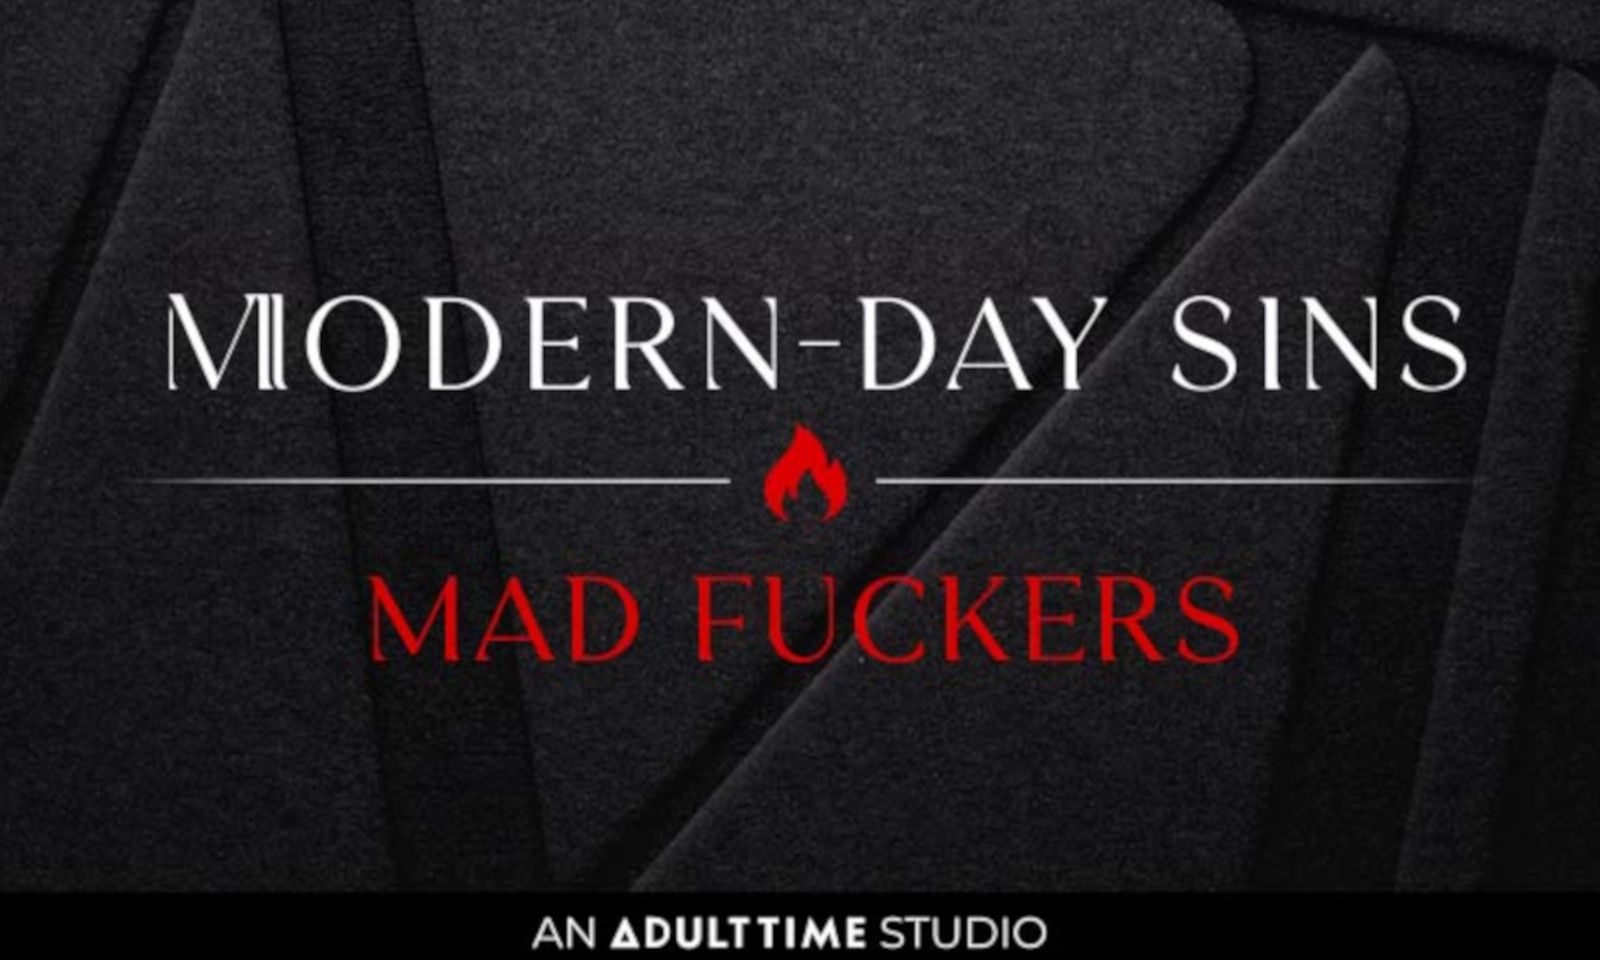 Adult Time Continues Deadly Sins Promo With 'Mad Fuckers'